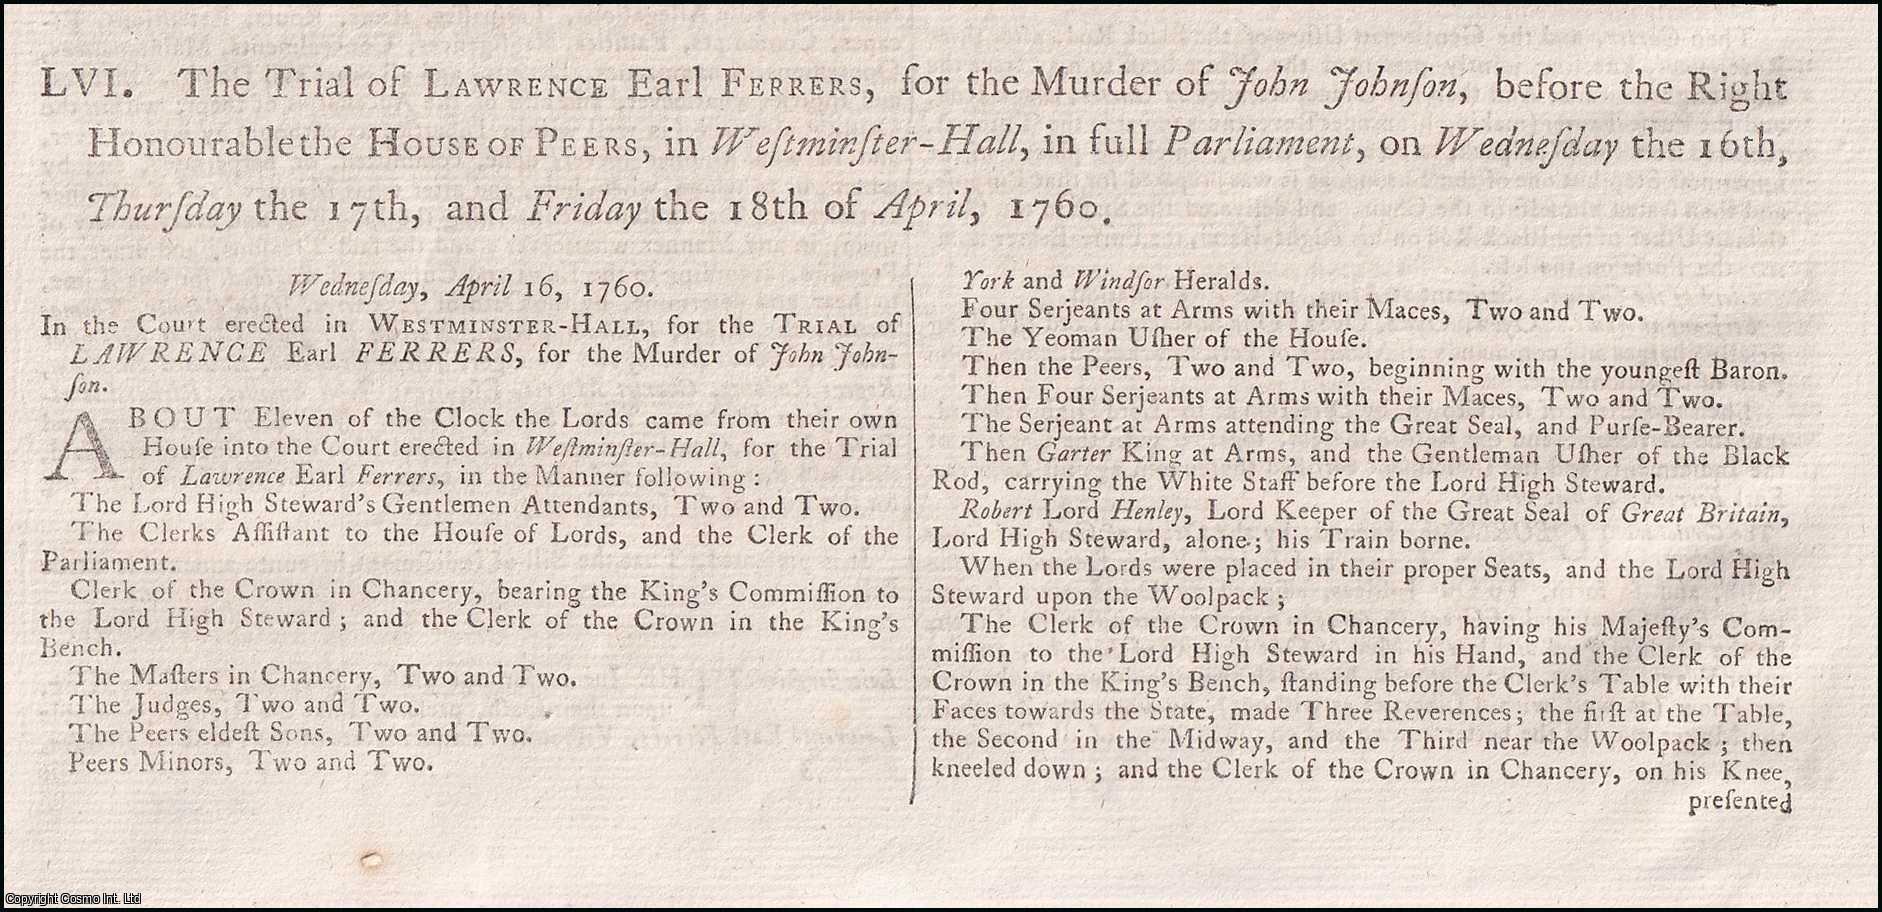 [Trial]. - The Trial of Lawrence Earl Ferrers, for the Murder of John Johnson, before the Right Honourable the House of Peers, in Westminster-Hall, in full Parliament, on Wednesday 16th, Thursday 17th, and Friday 18th of April, 1760. An original report from the Collected State Trials.